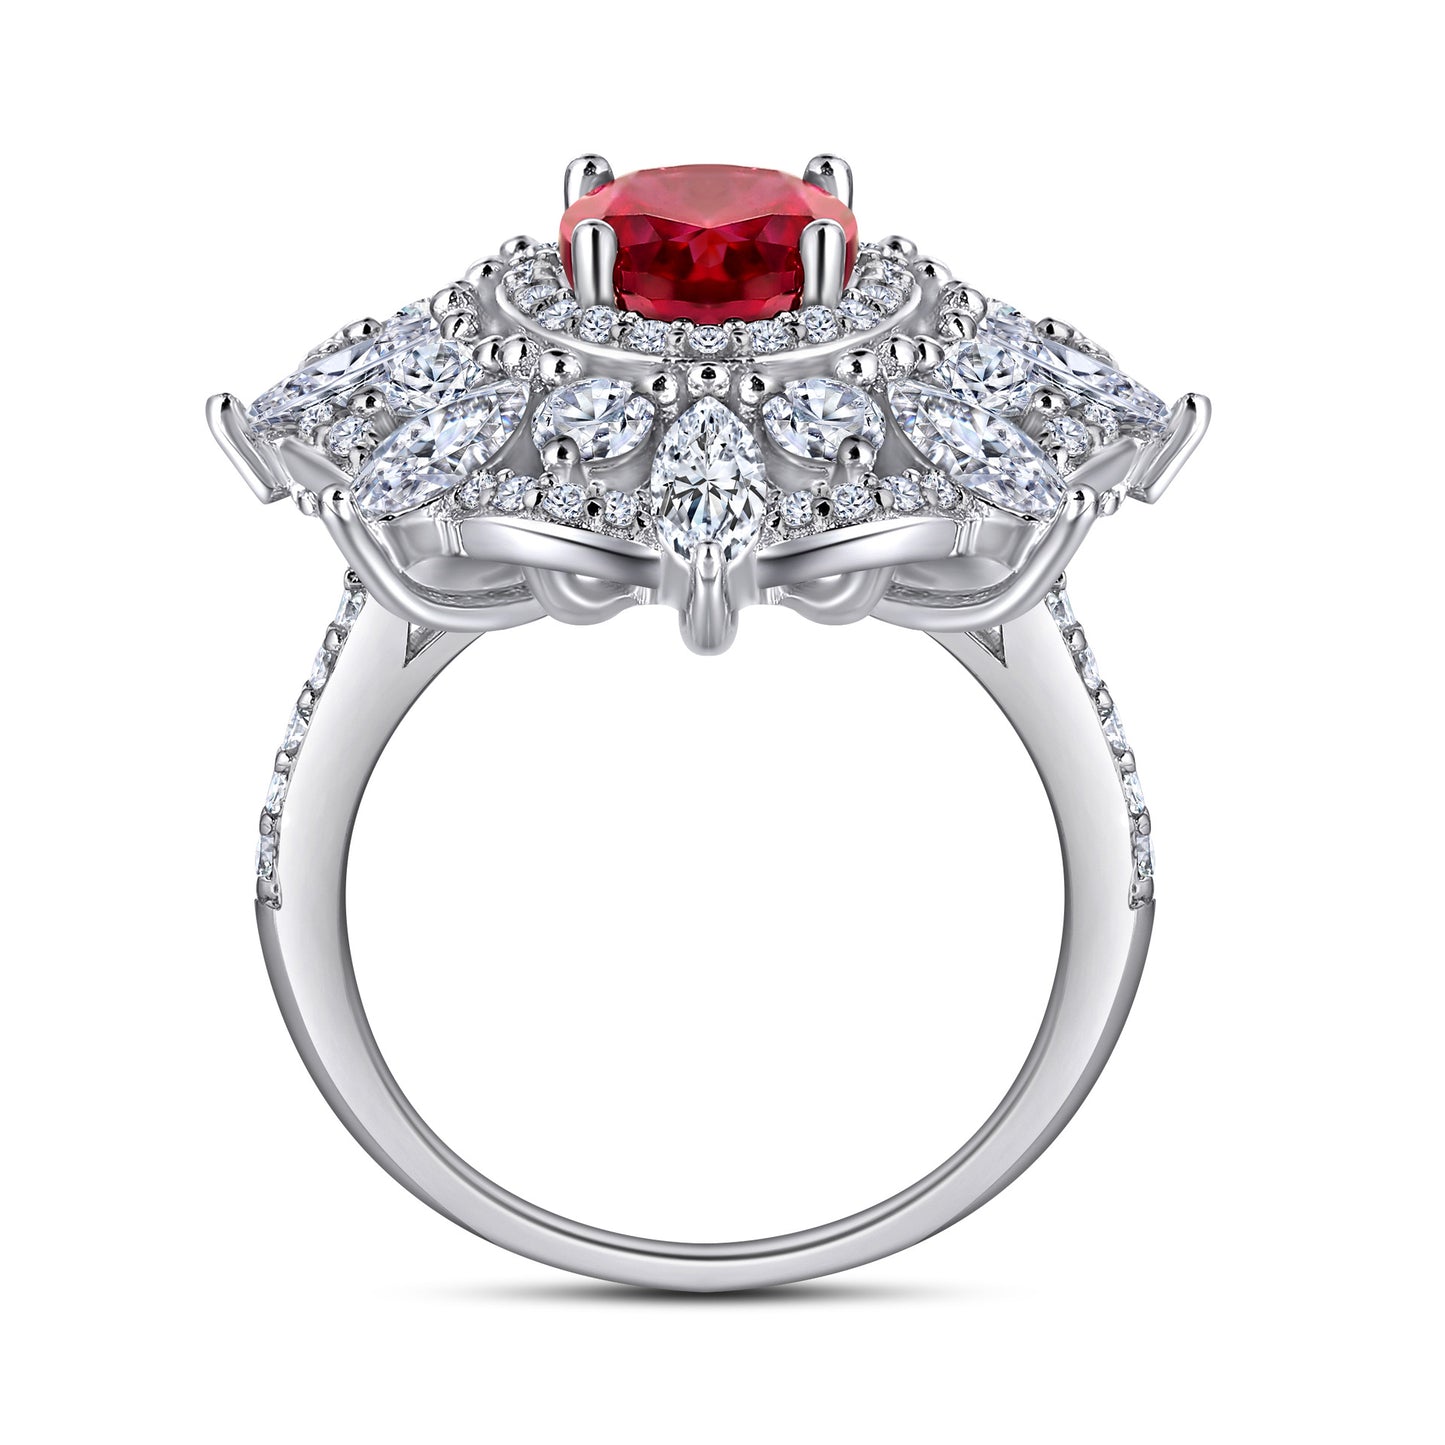 (1.5CT) Ice Cut Red Zircon Sumptuous Flower Silver Ring for Women